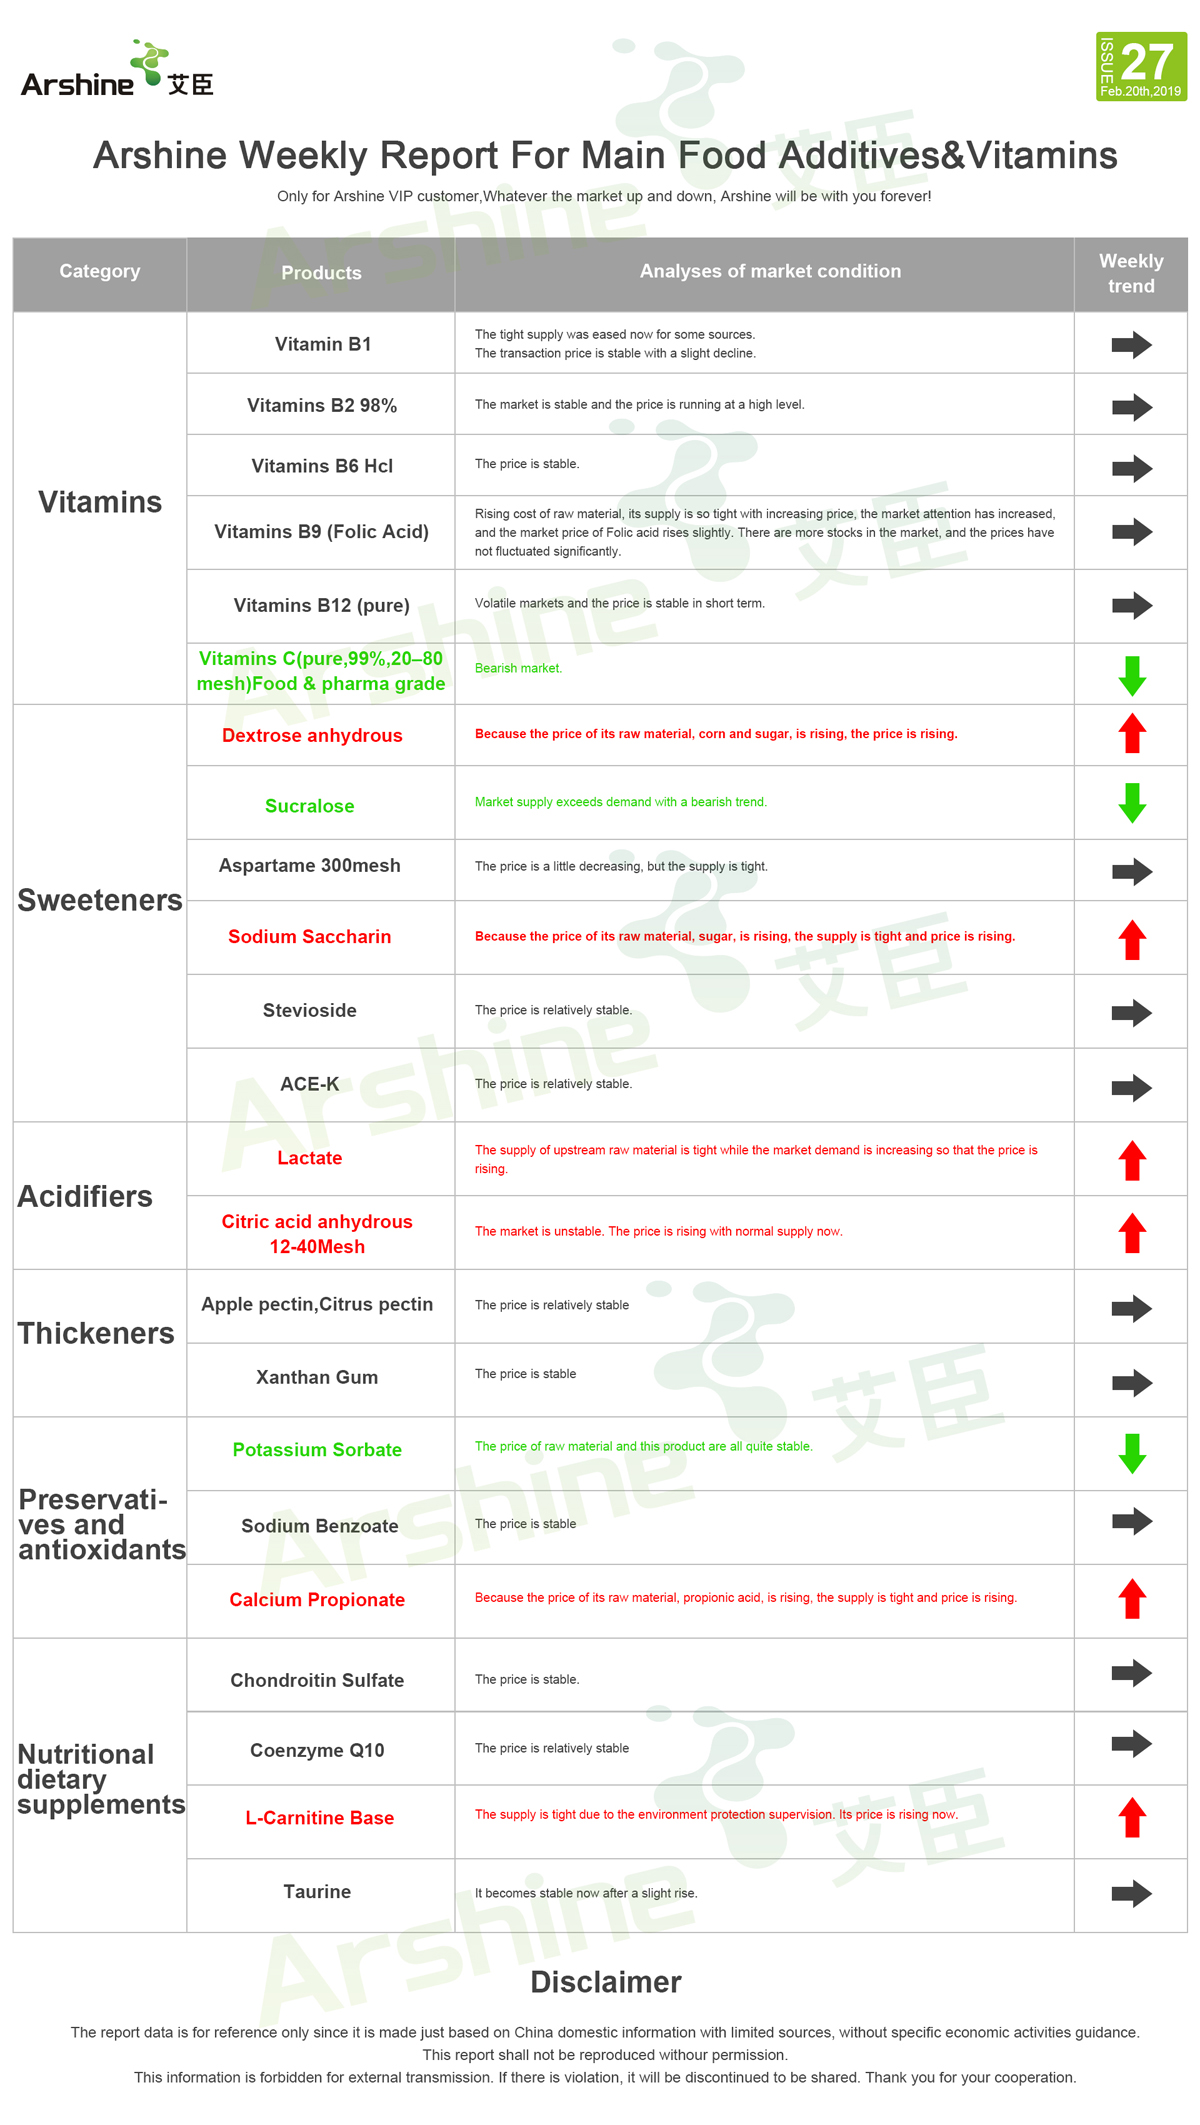 Arshine Weekly Report For Main Food Additives & Vitamins